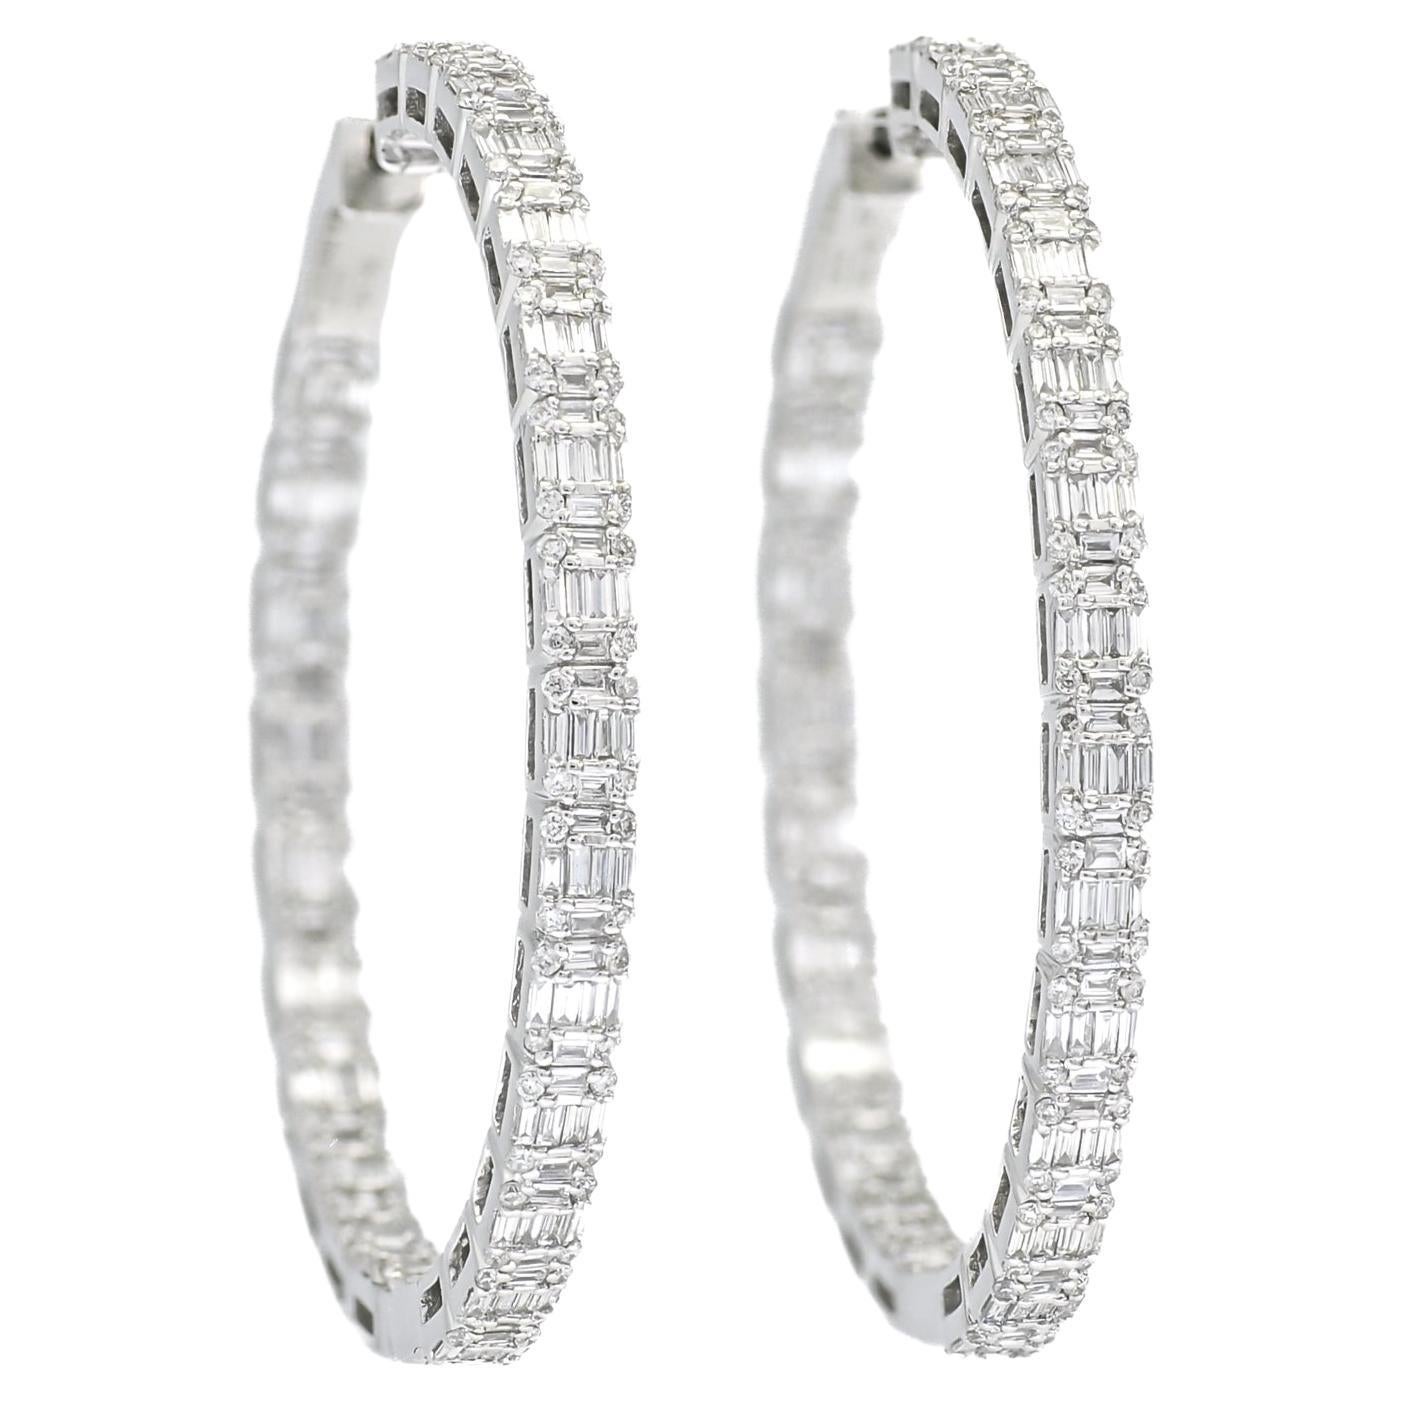 The cluster of baguette and round diamonds in these 18KT White Gold Illusion Hoop Earrings is an exquisite display of craftsmanship and artistry. This combination embodies the elegance and sophistication of classic jewelry design while introducing a